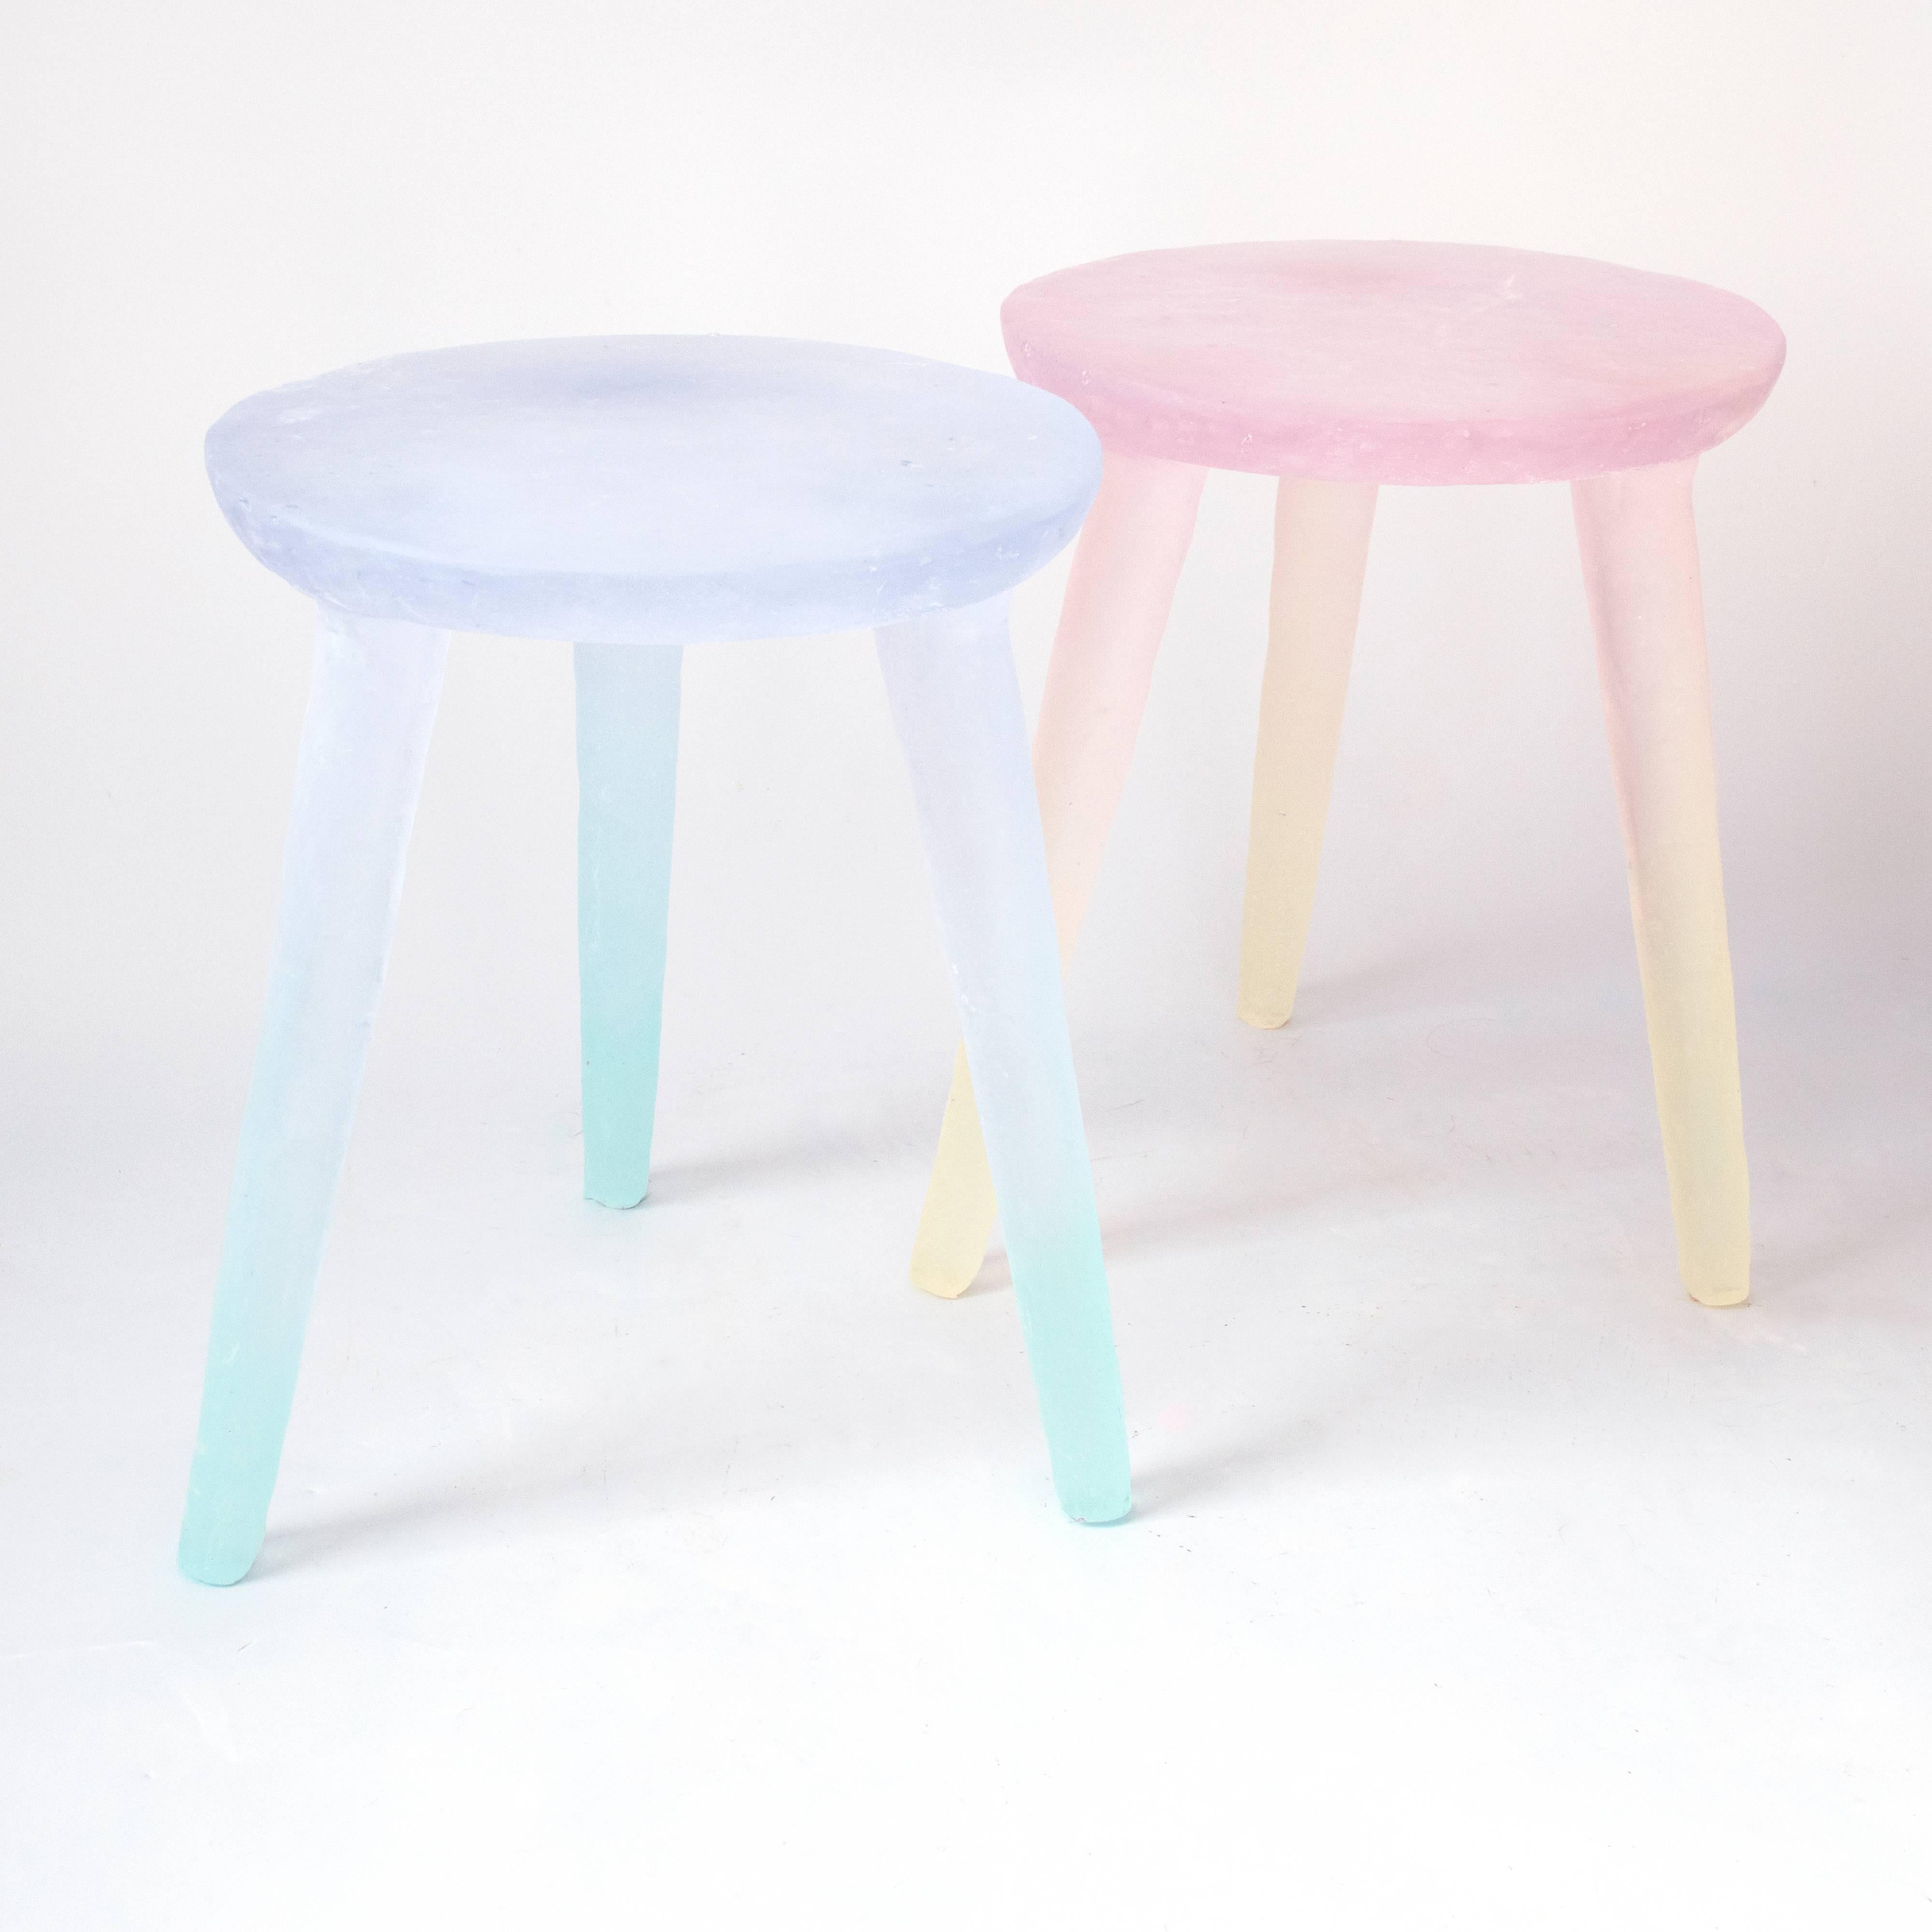 Glow Side Table or Stool in Periwinkle to Aqua, Handmade from Recycled Resin For Sale 1